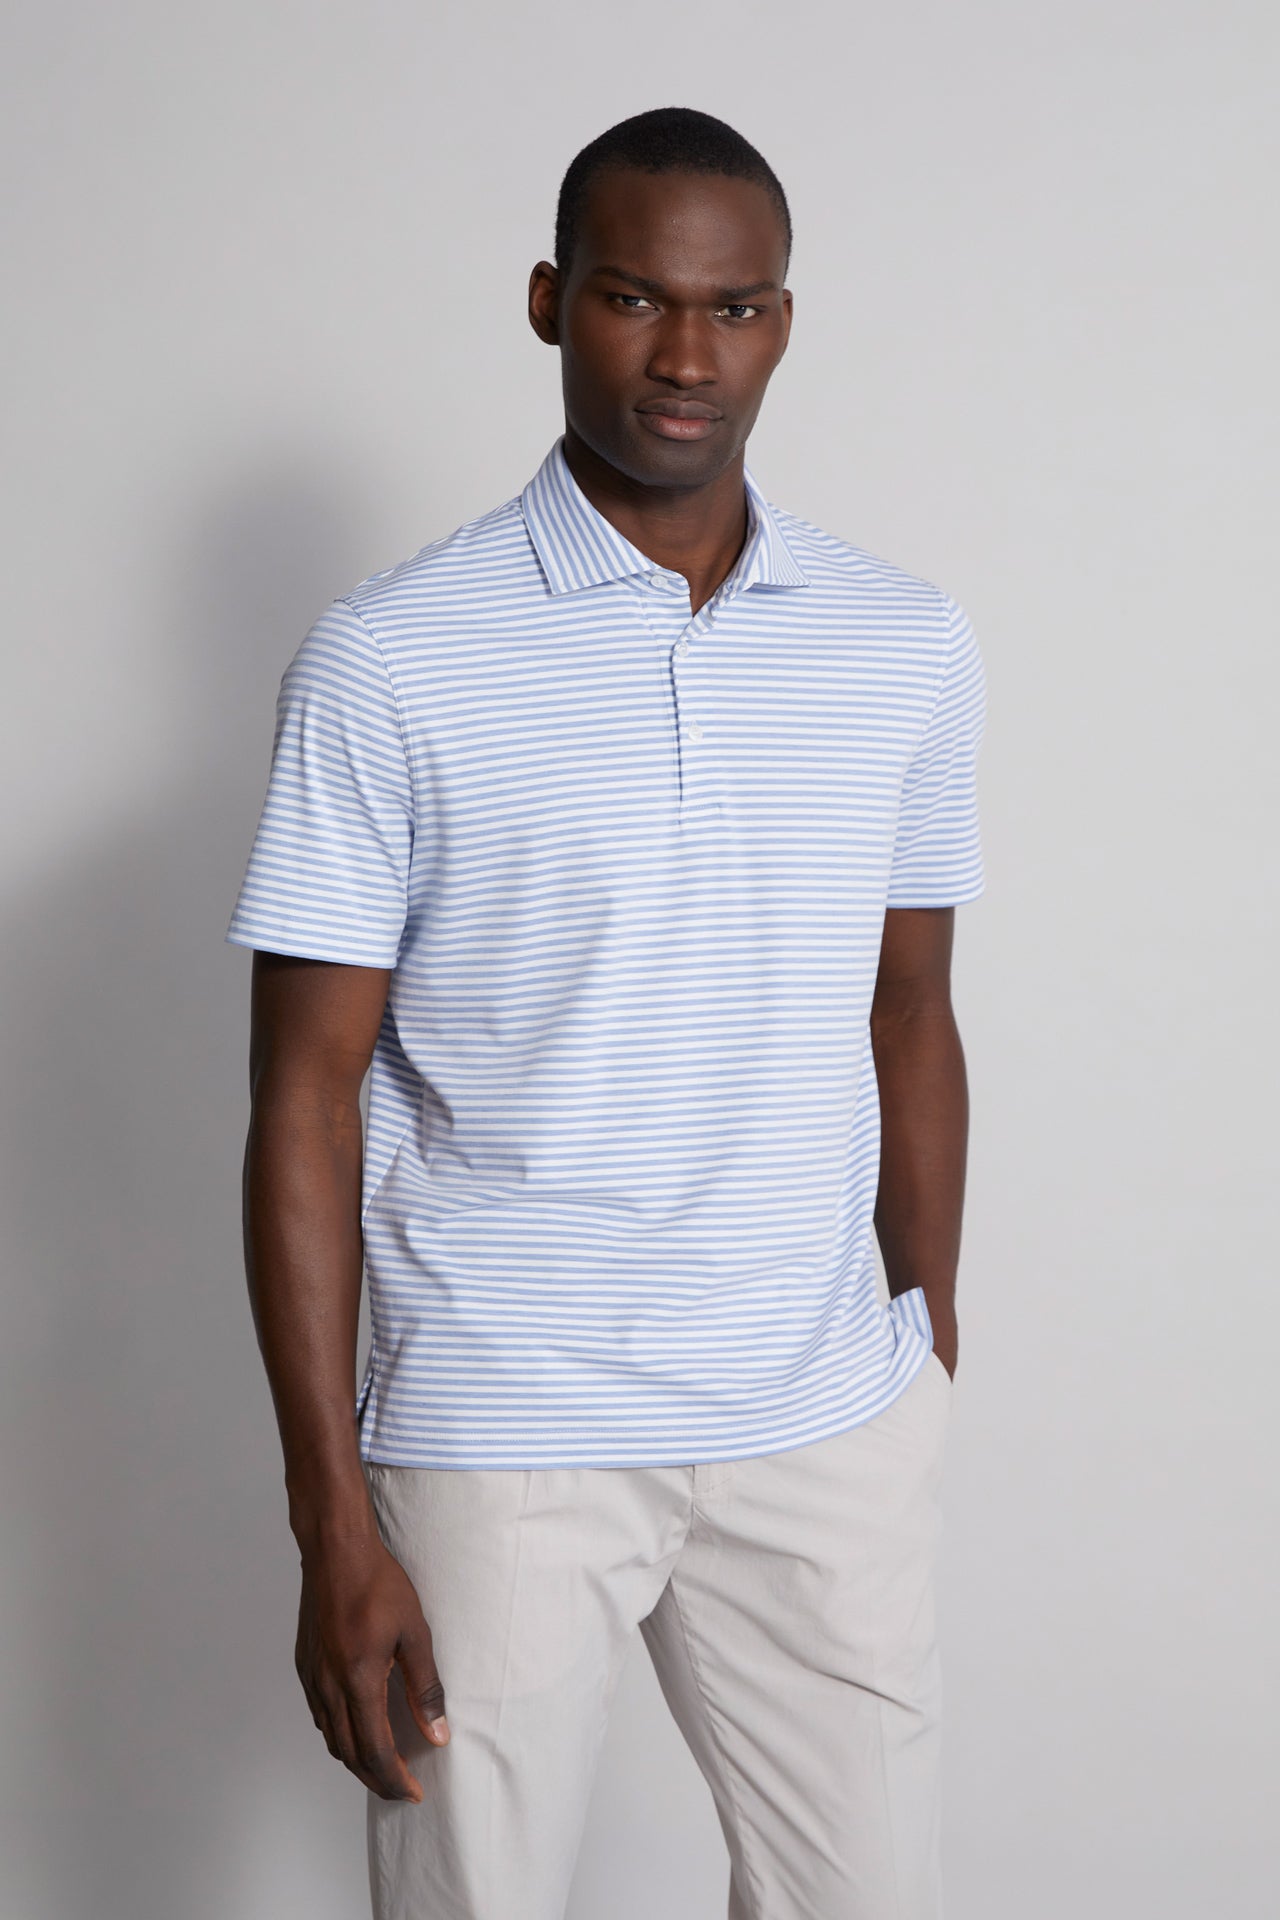 men's striped polo t-shirt blue and white - side view